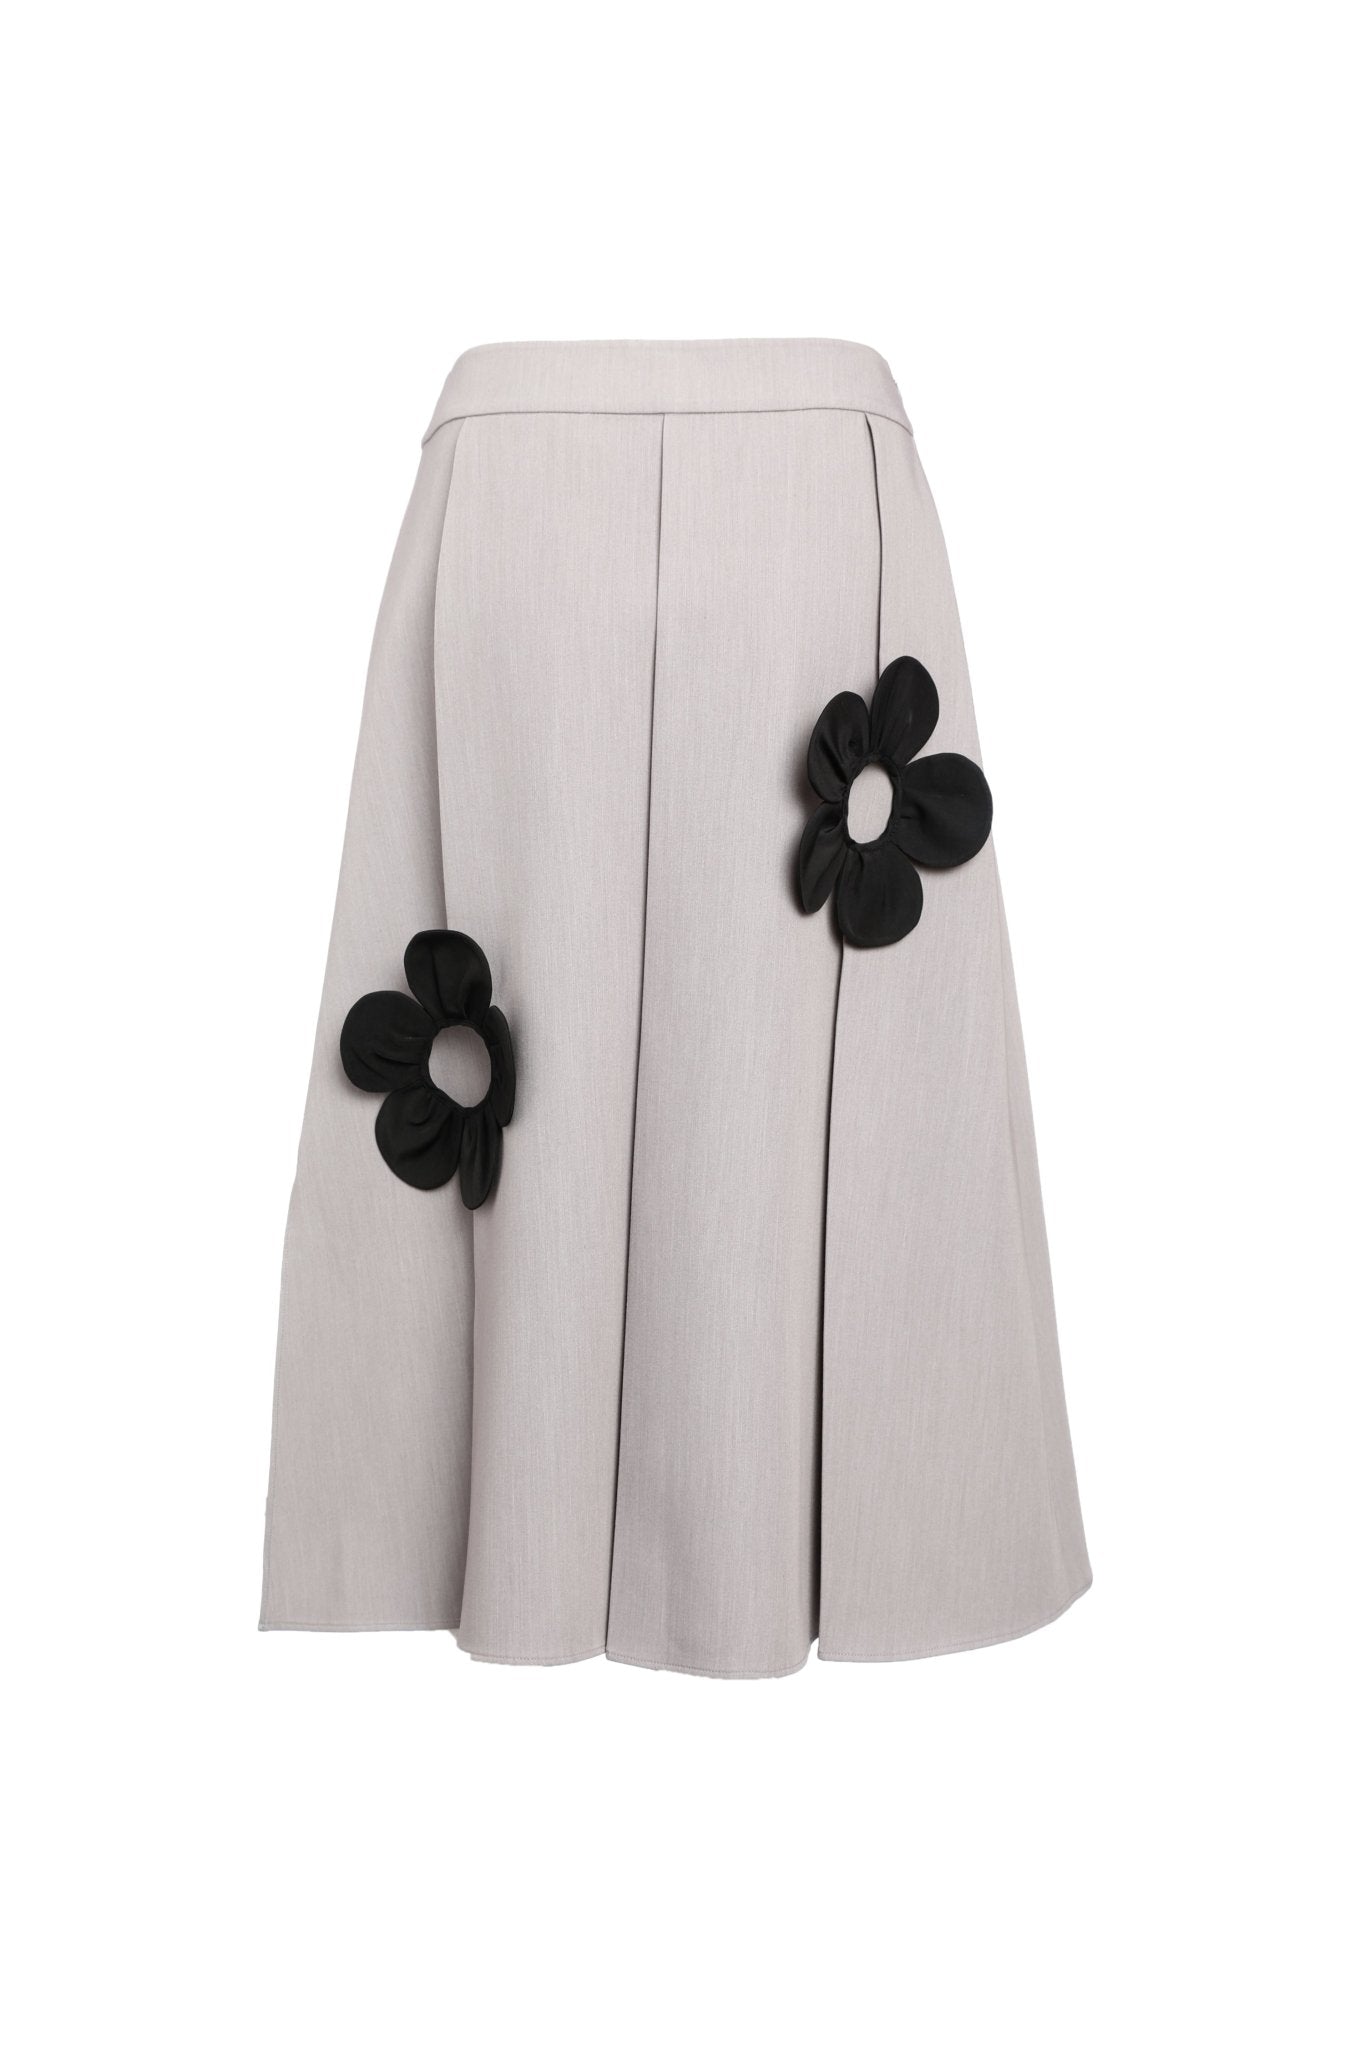 FENGYI TAN Hollow Out Three-dimensional Flowers Pleated Skirt | MADA IN CHINA